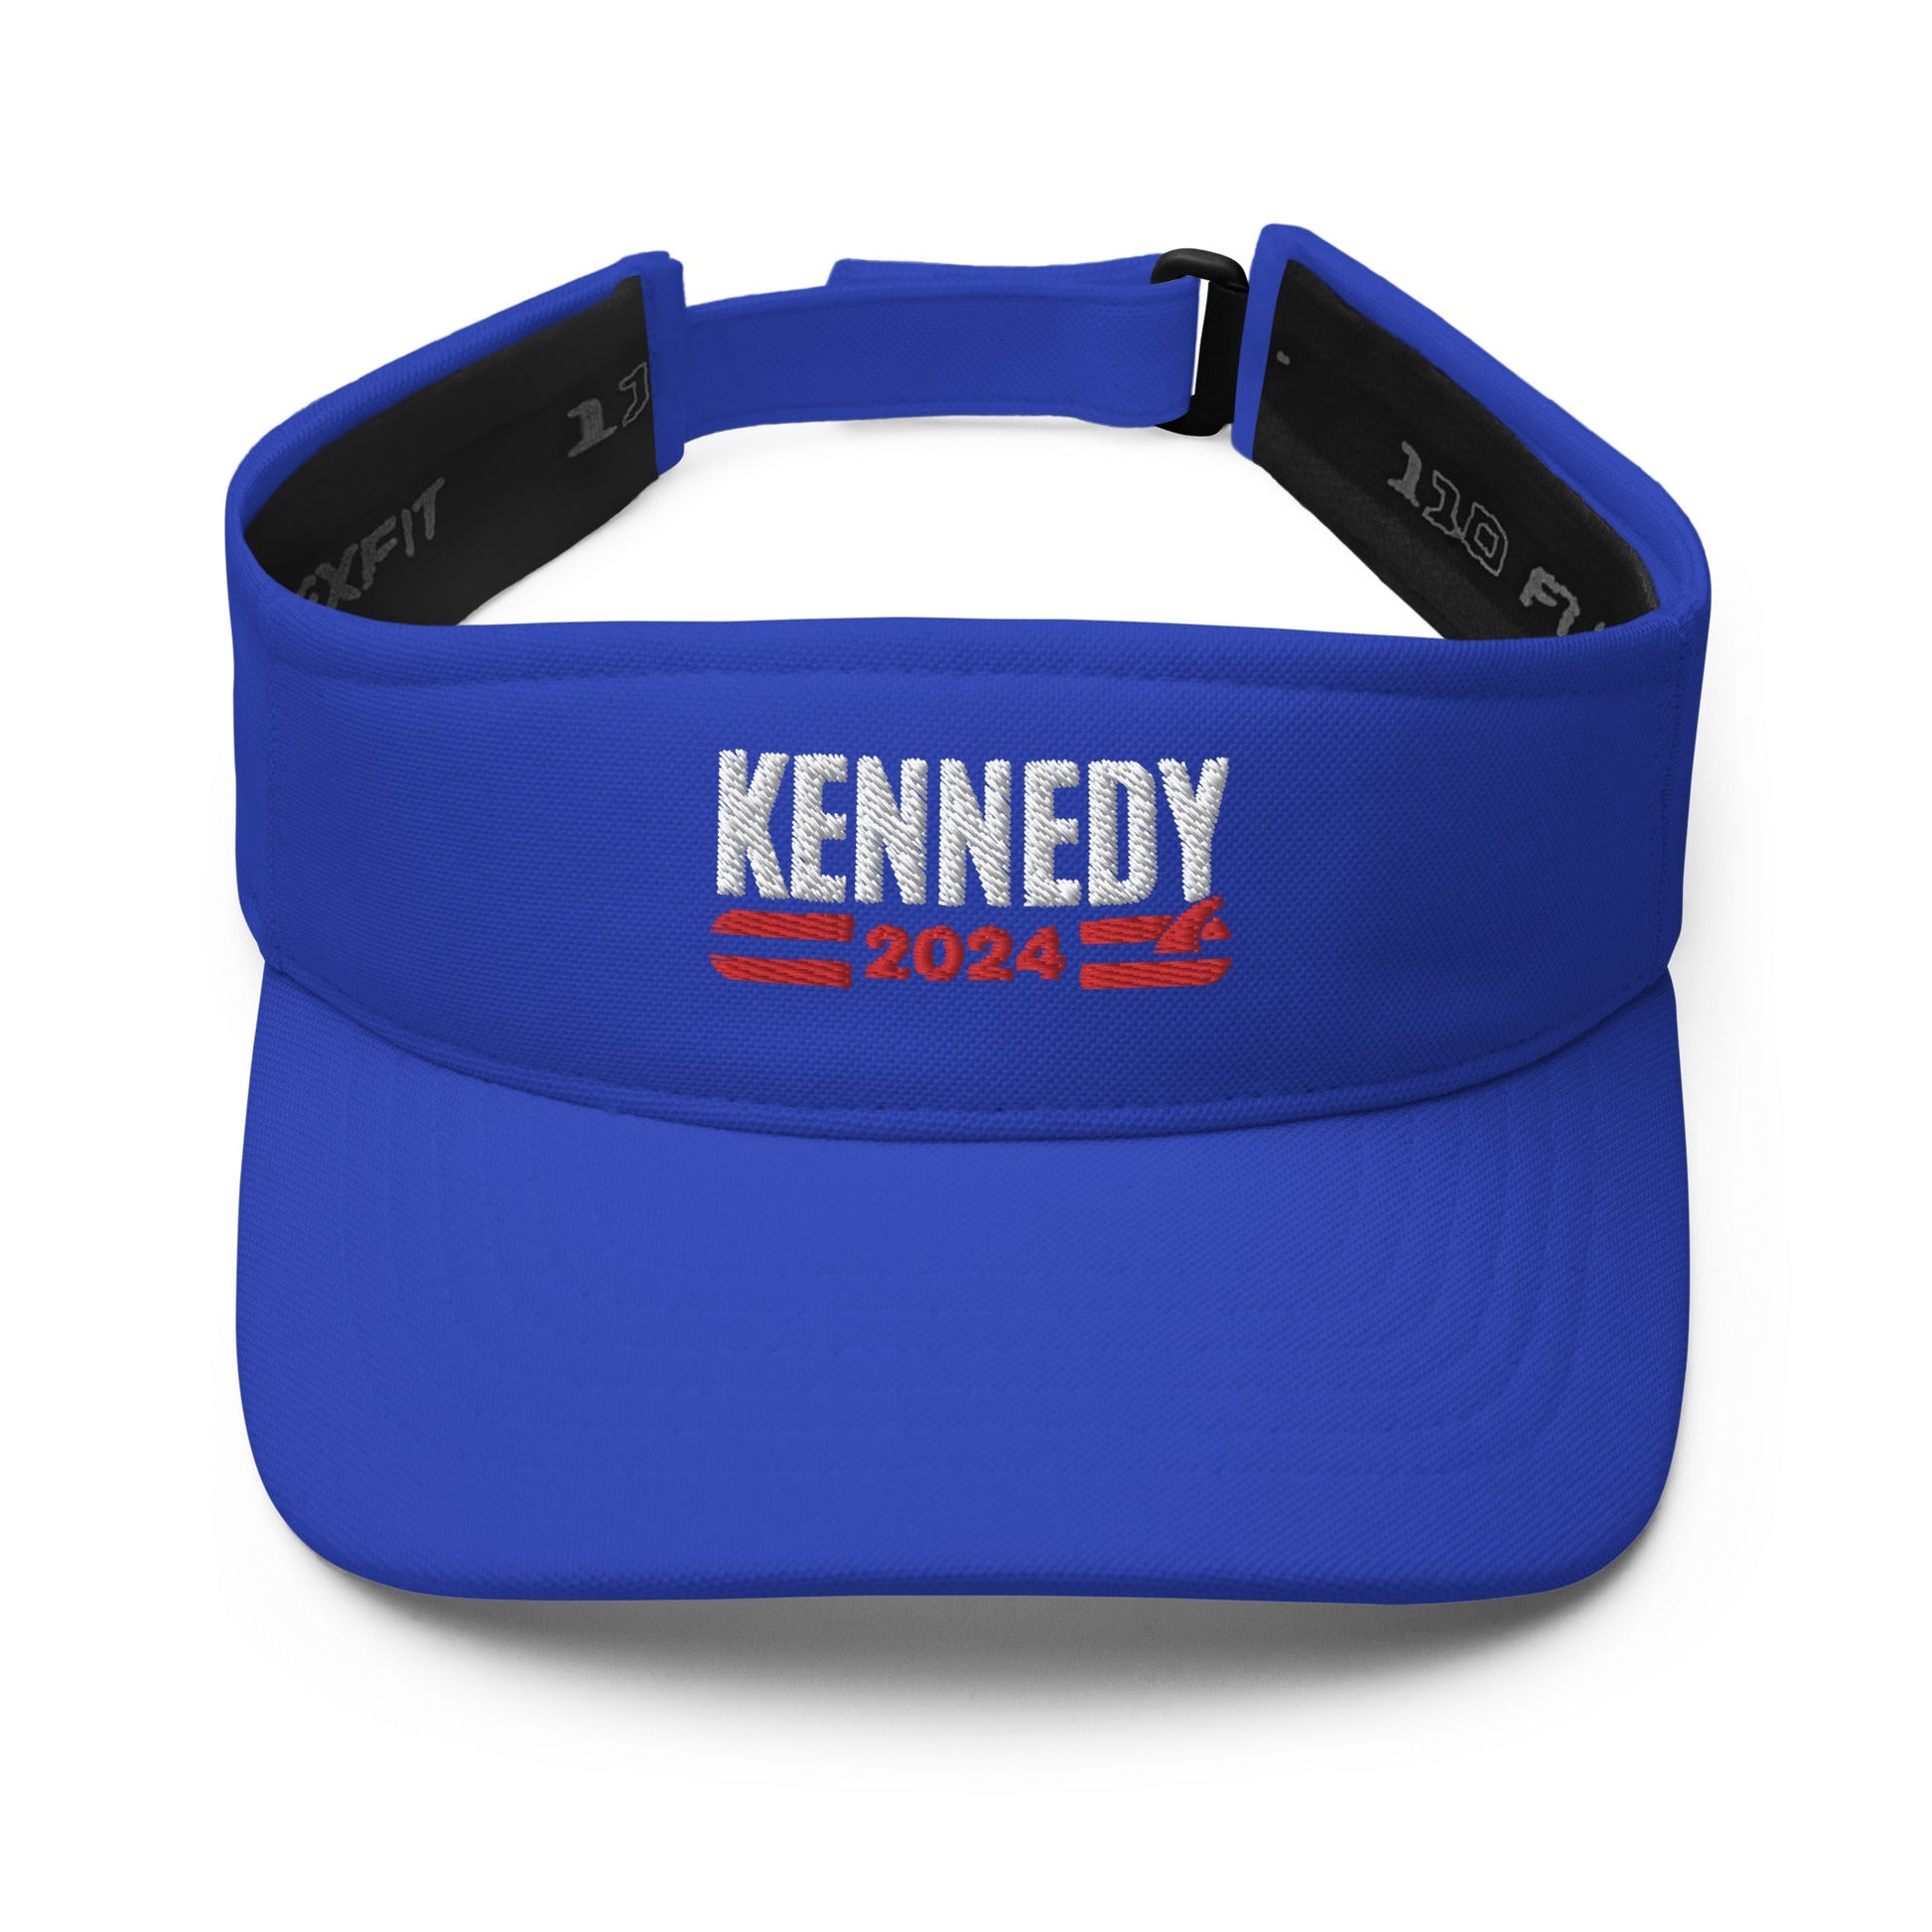 Kennedy Classic Surf Embroidered Visor - TEAM KENNEDY. All rights reserved